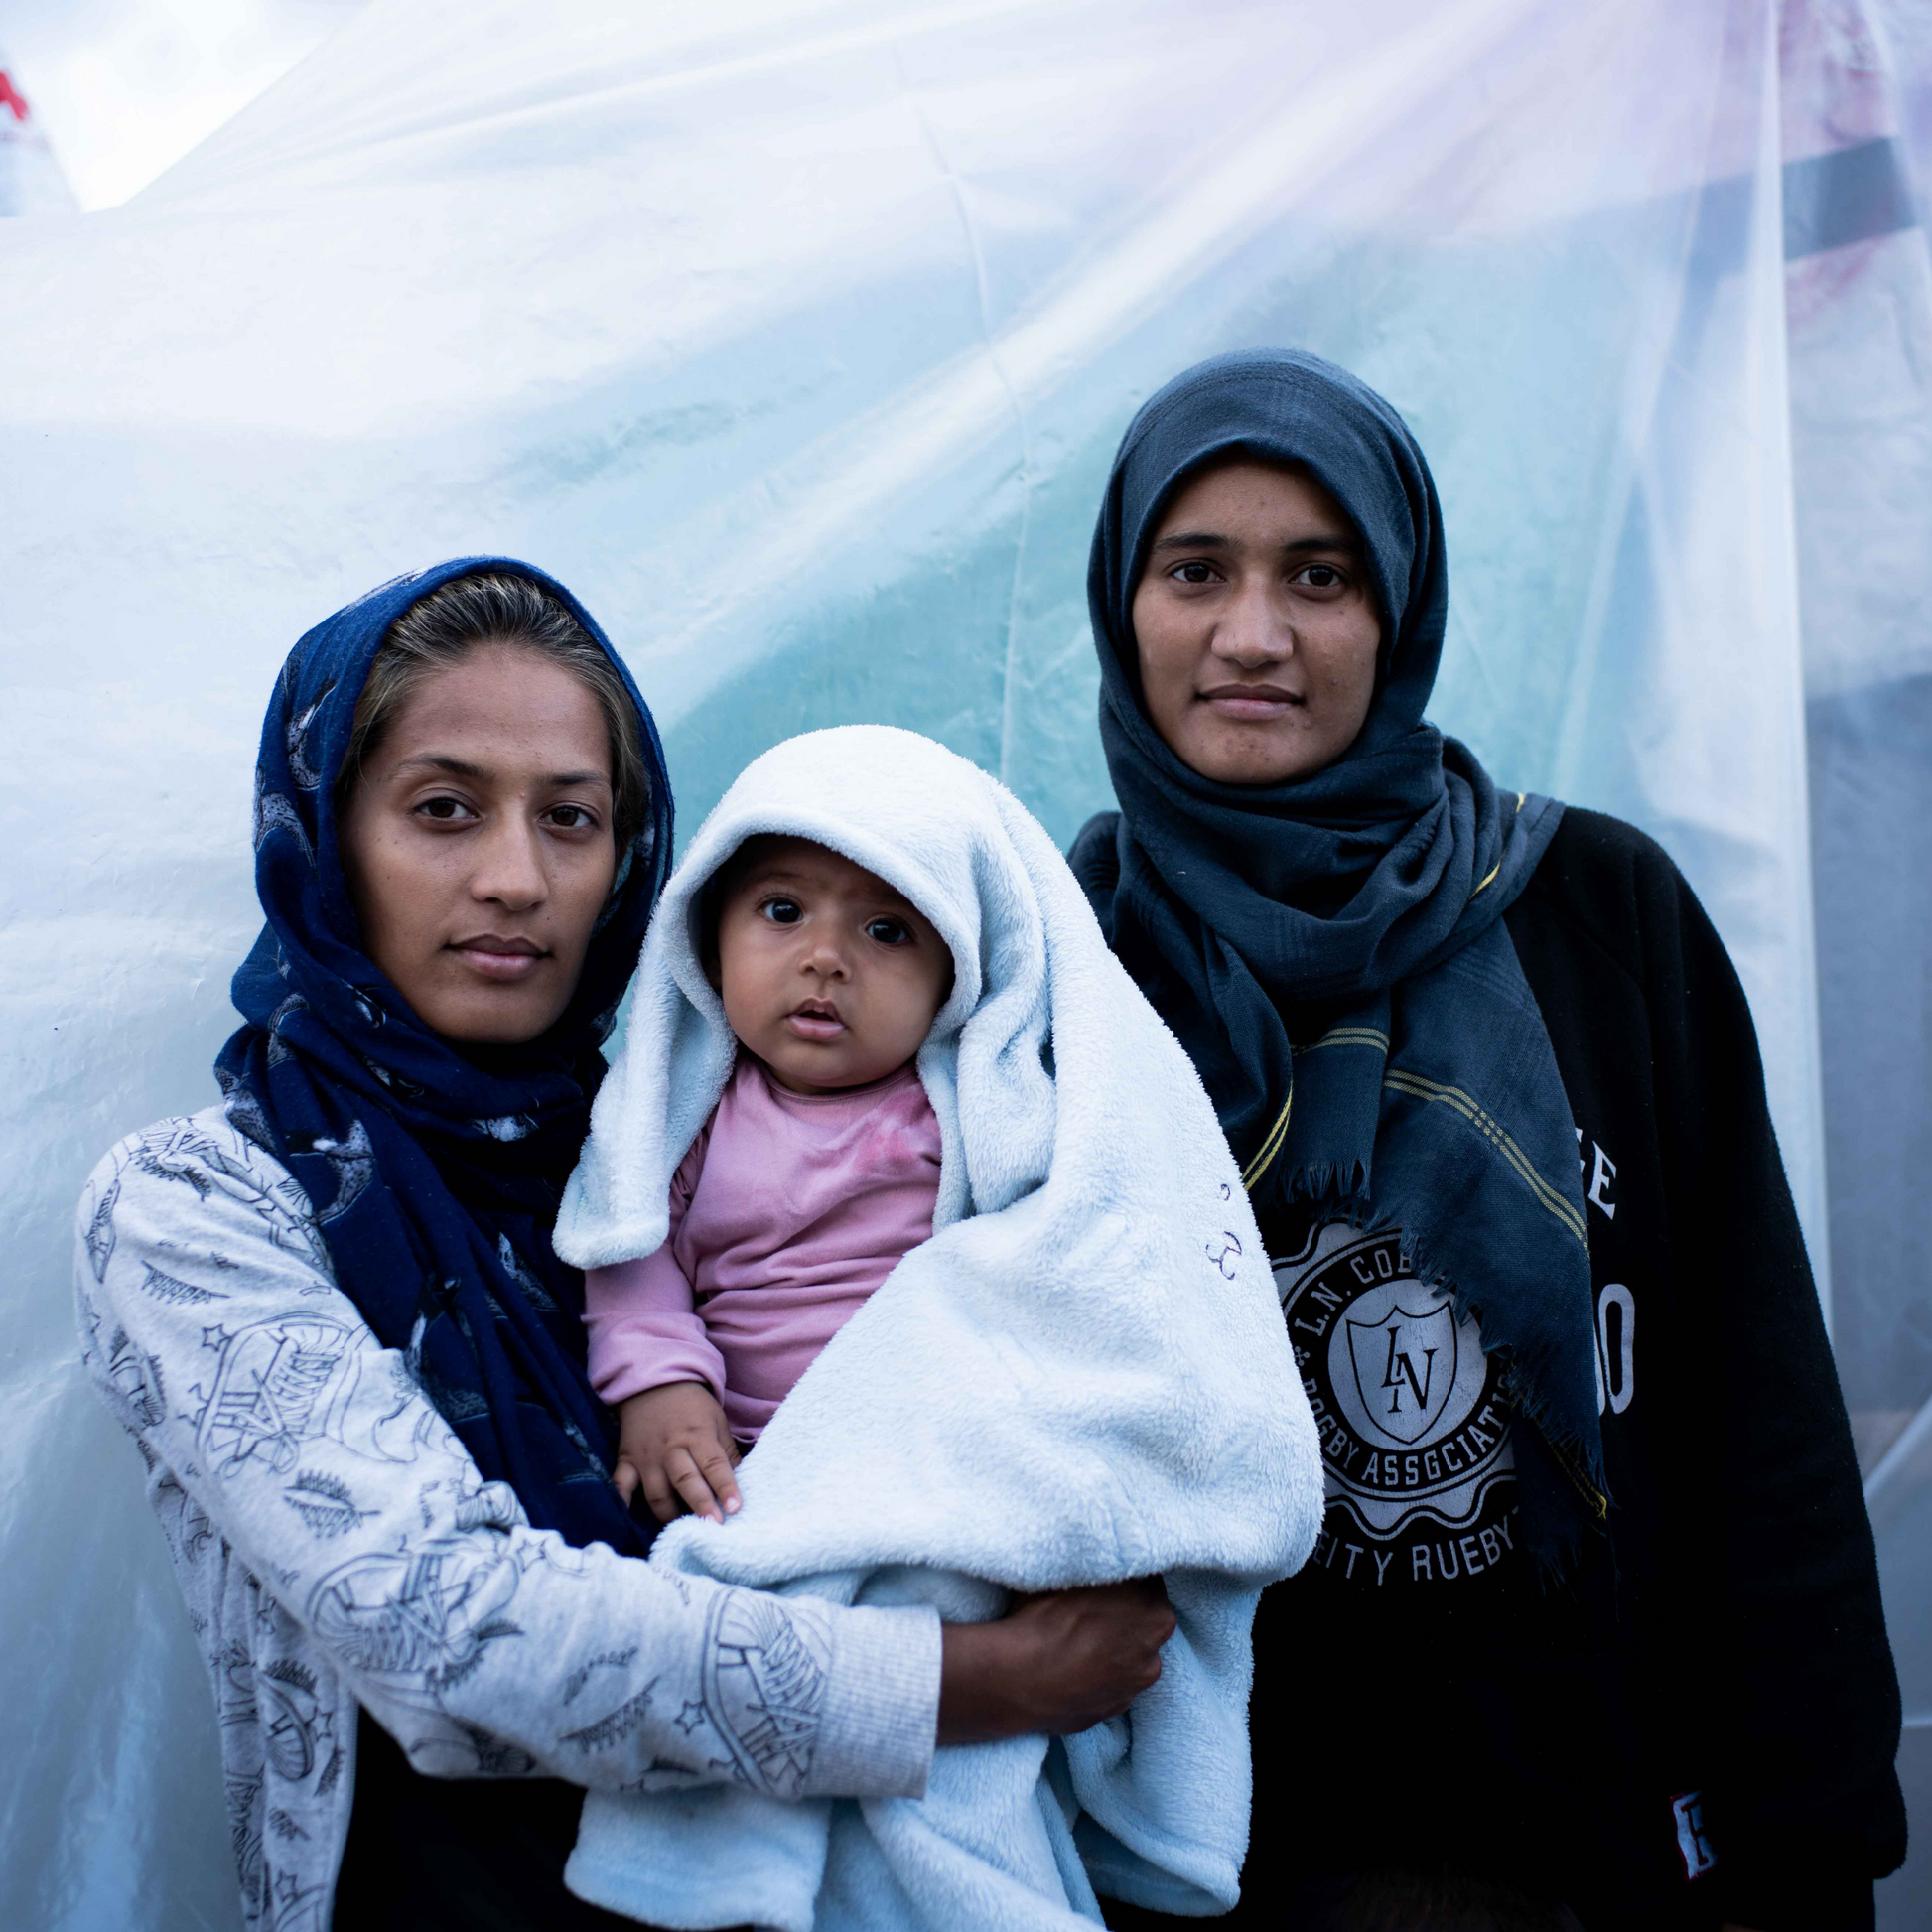 This photography was taken in a camp. In the image there are two adult refugee women with their heads covered and the one of the left is holding a baby who wears a pink top and covered with a thick white blanket. They are pictured in front of a make shift accommodation that is covered with a thick white plastic sheet.